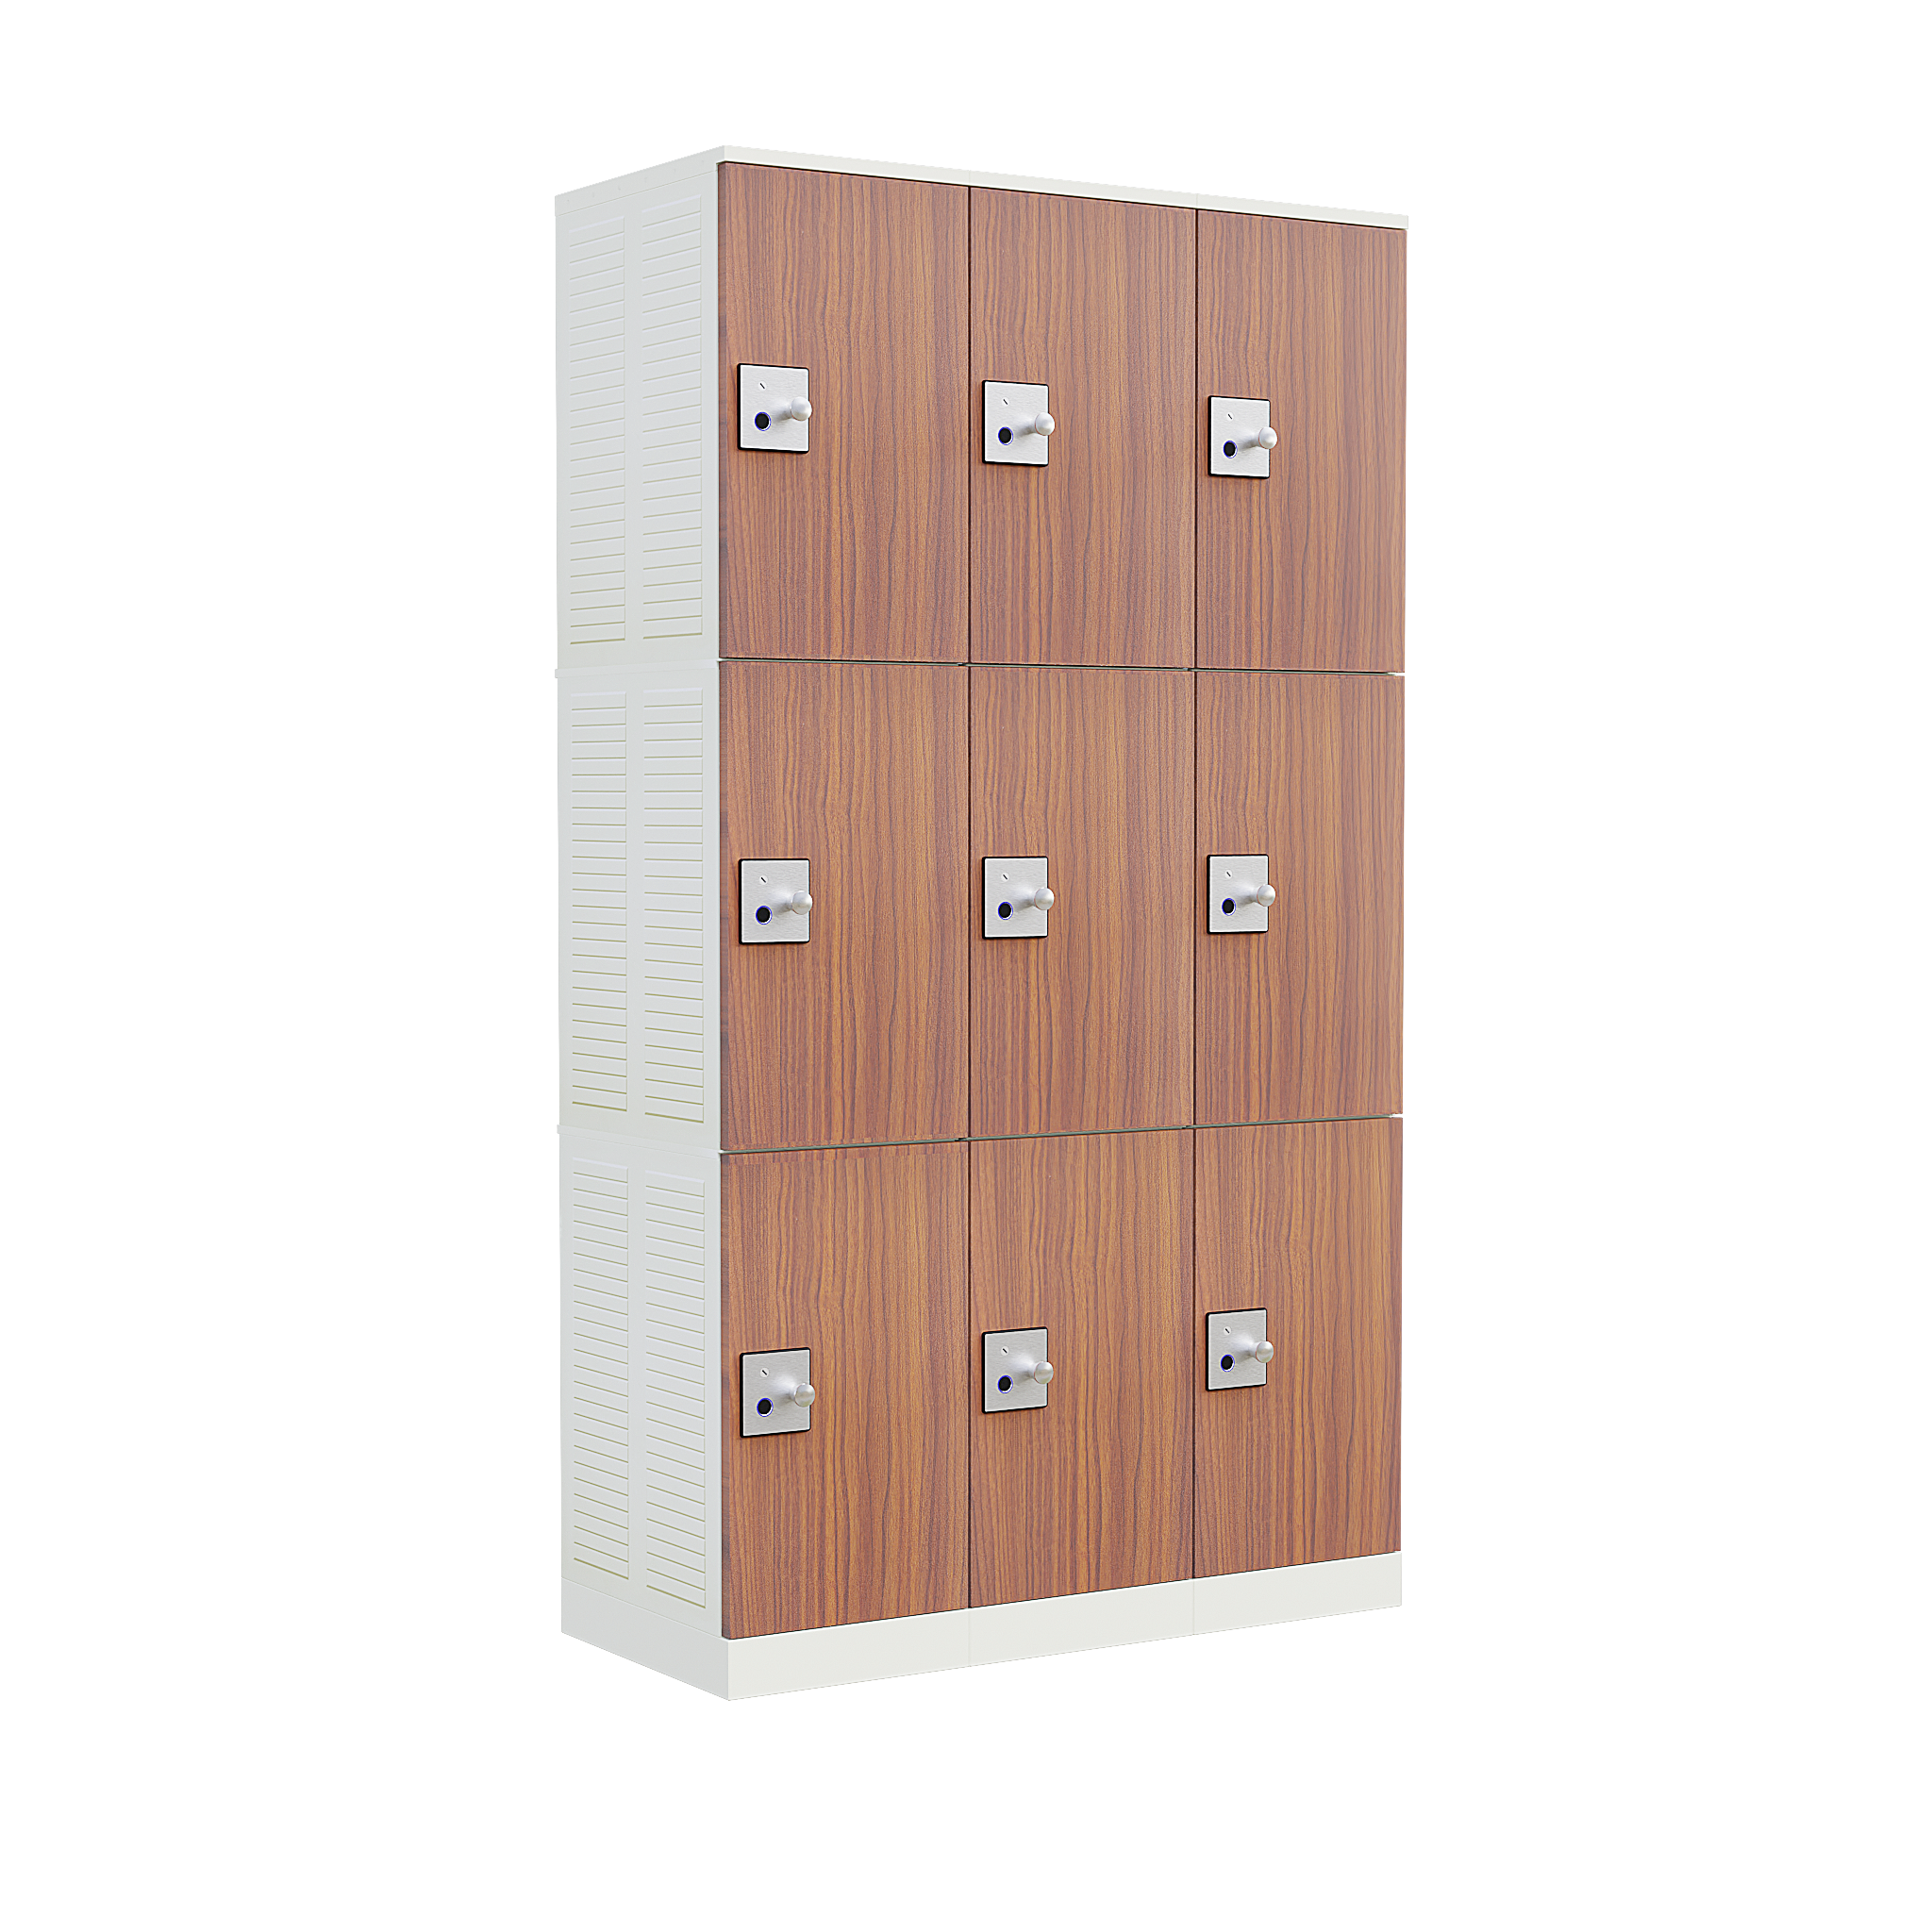 What are Smart Parcel Lockers